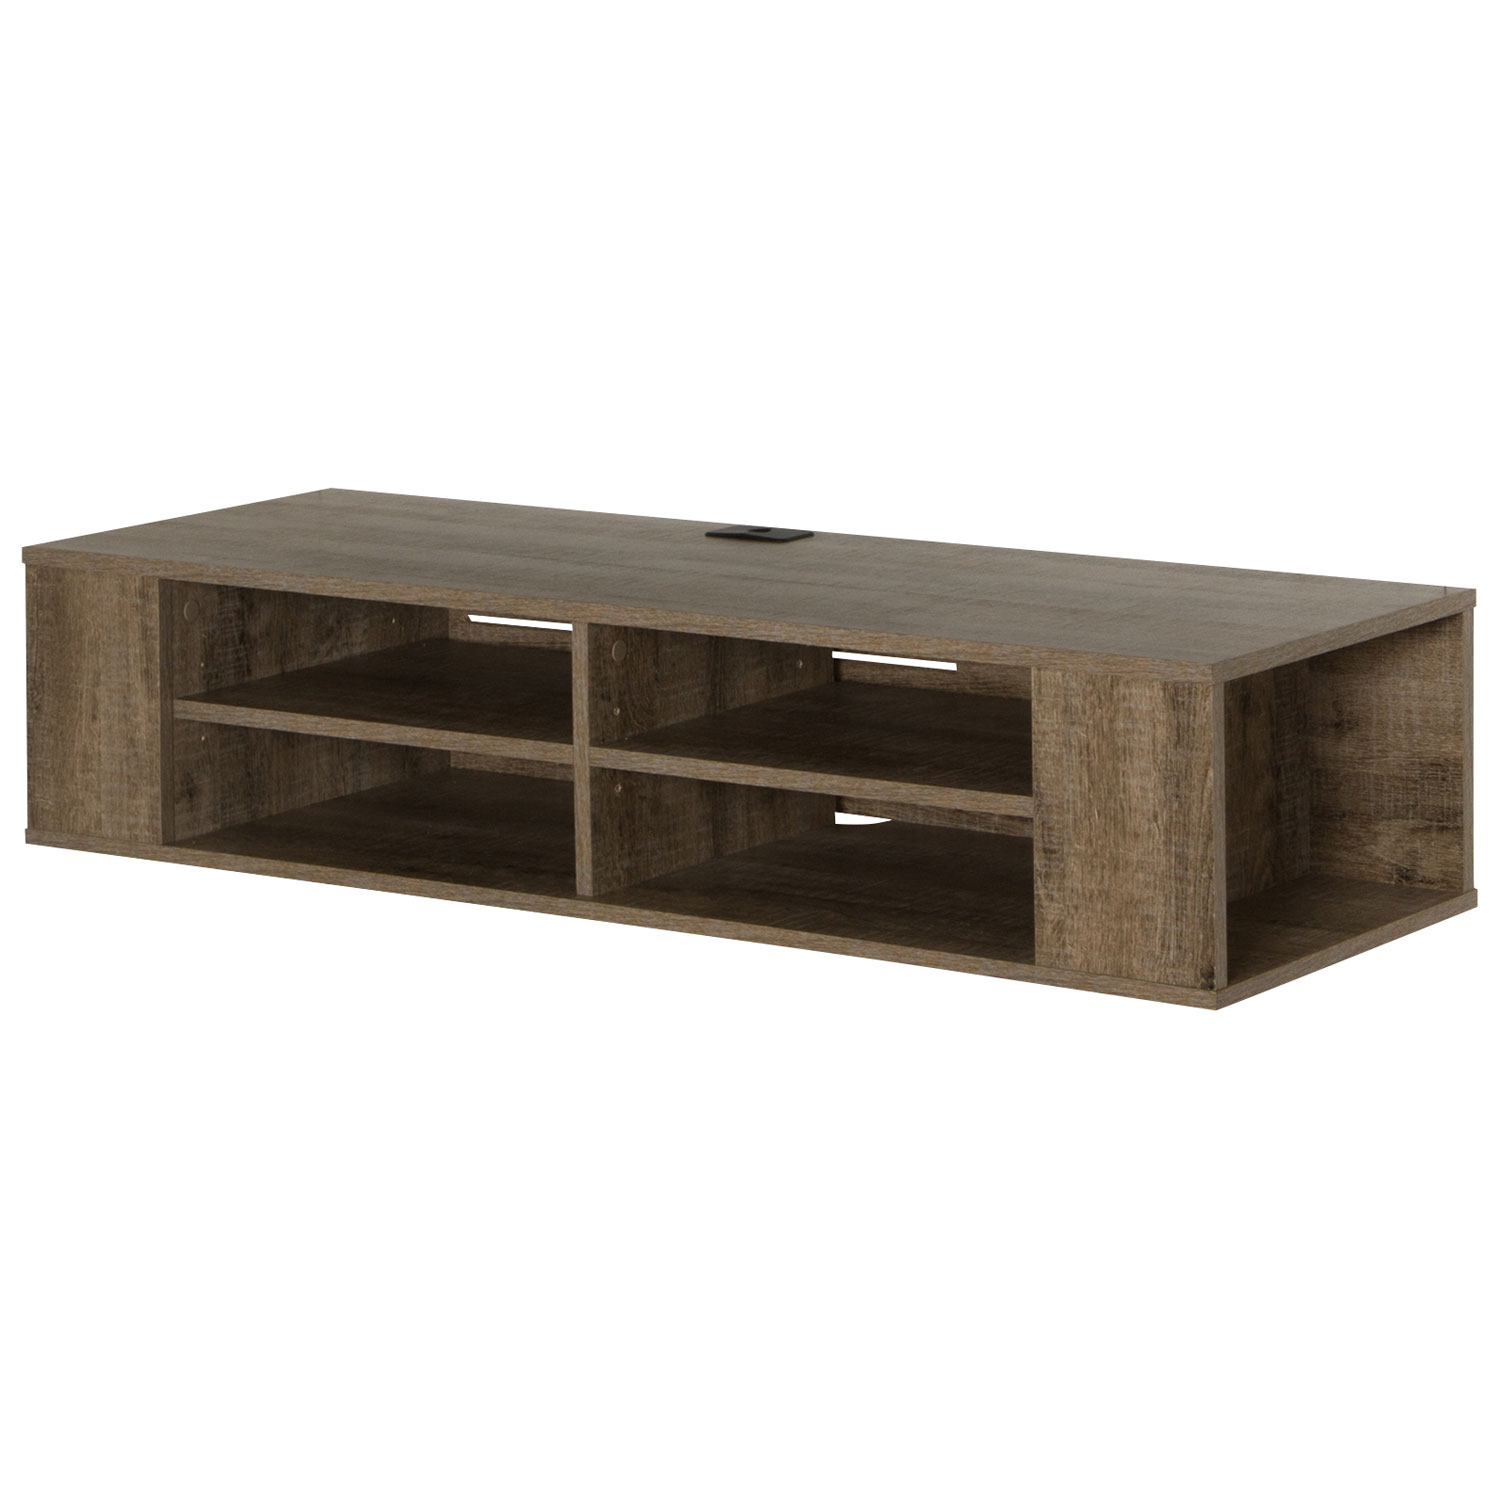 South Shore 55" Wall Mounted TV Stand - Weathered Oak